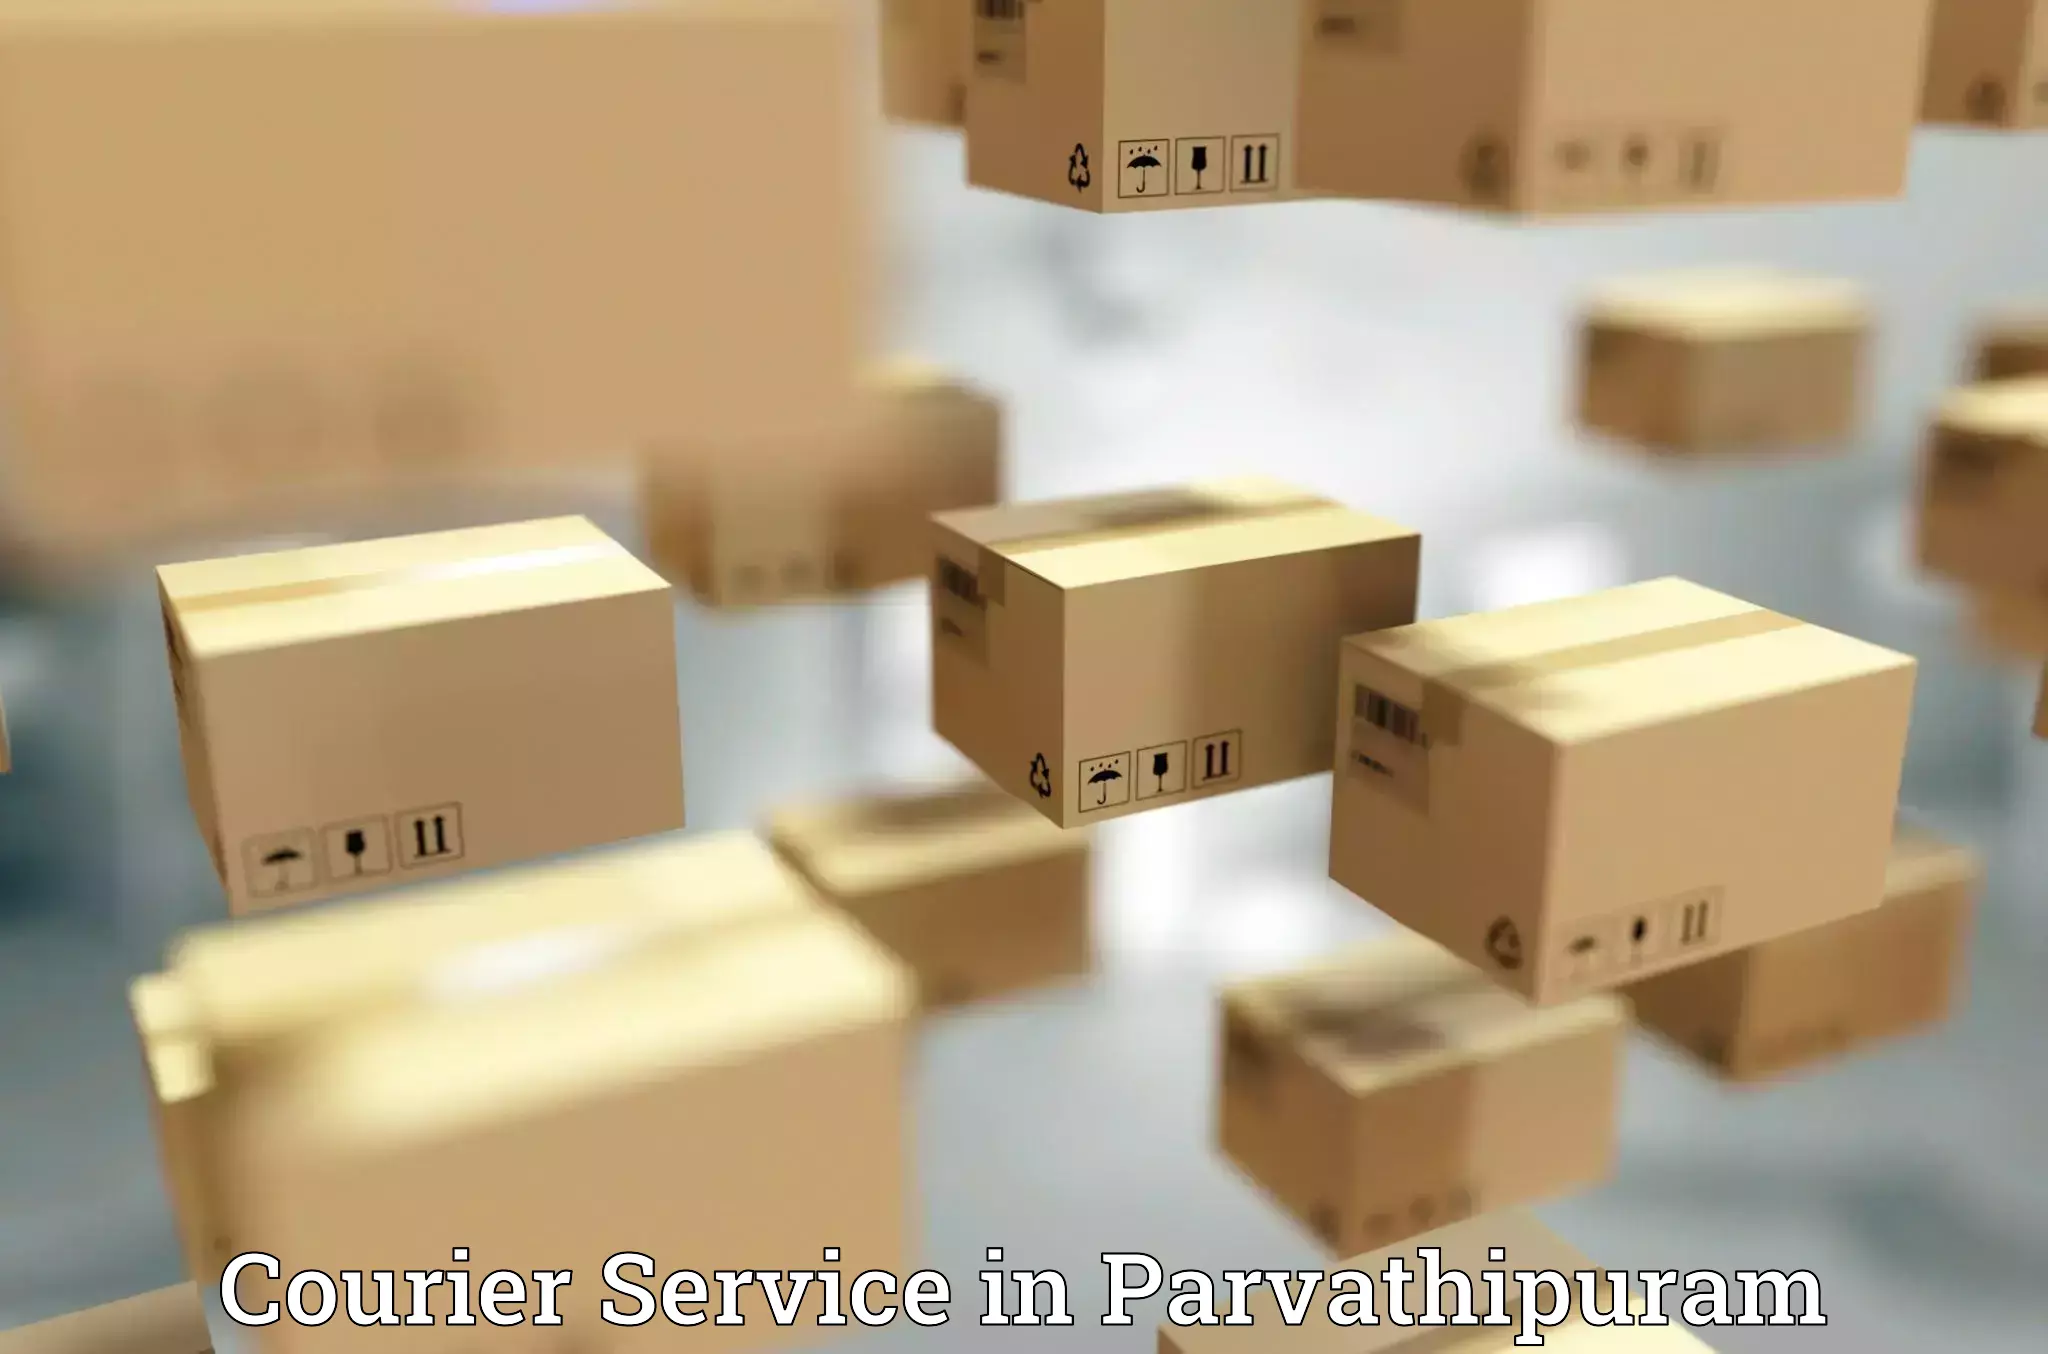 Same-day delivery solutions in Parvathipuram